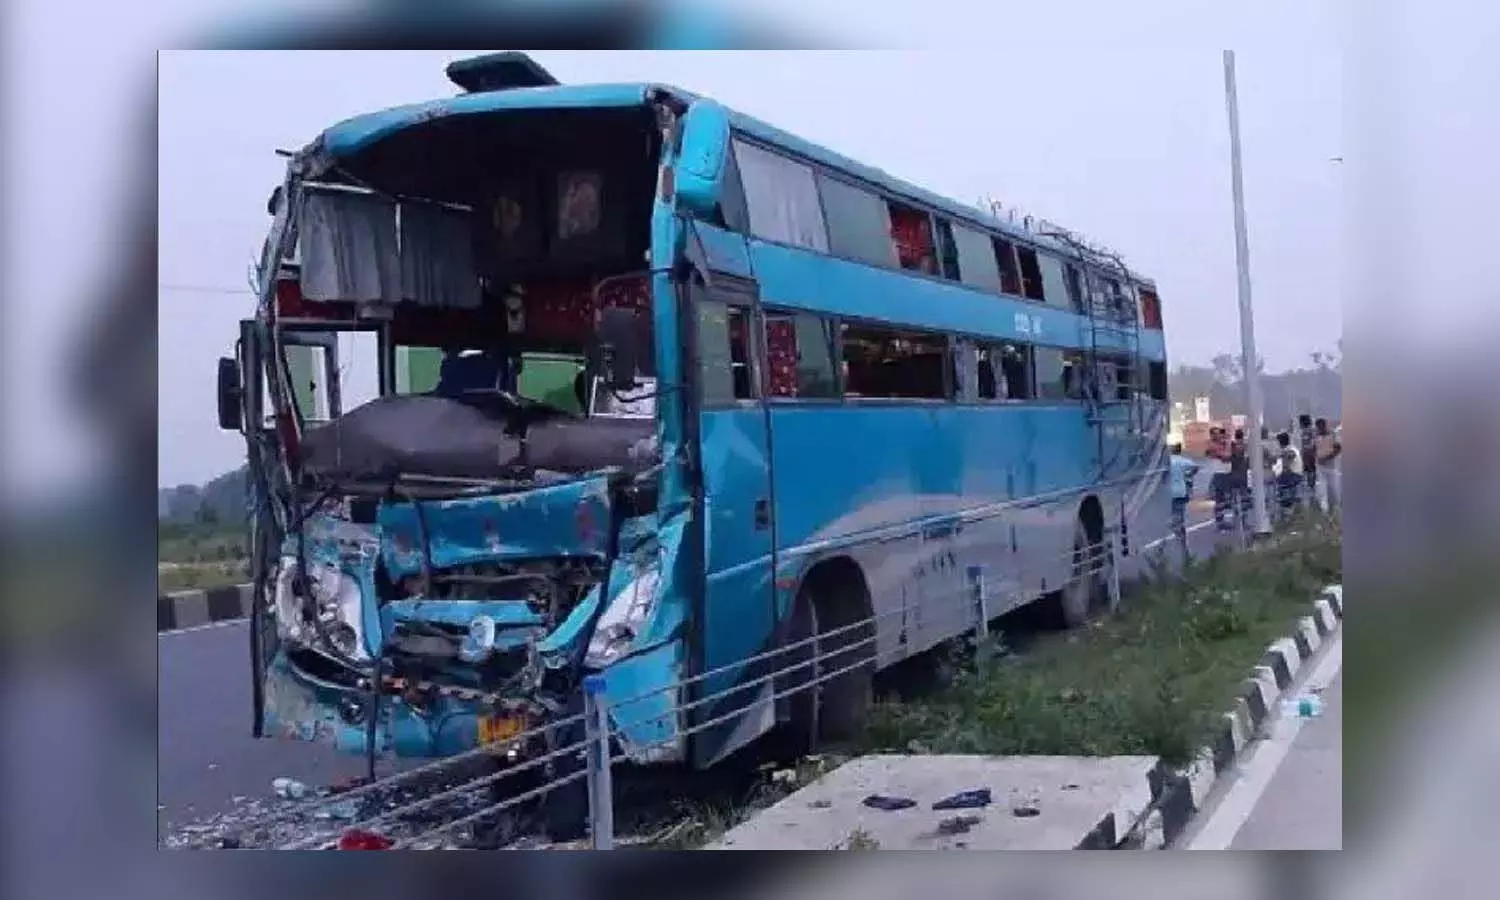 Bus hit hard in truck, serious injuries to 30 passengers